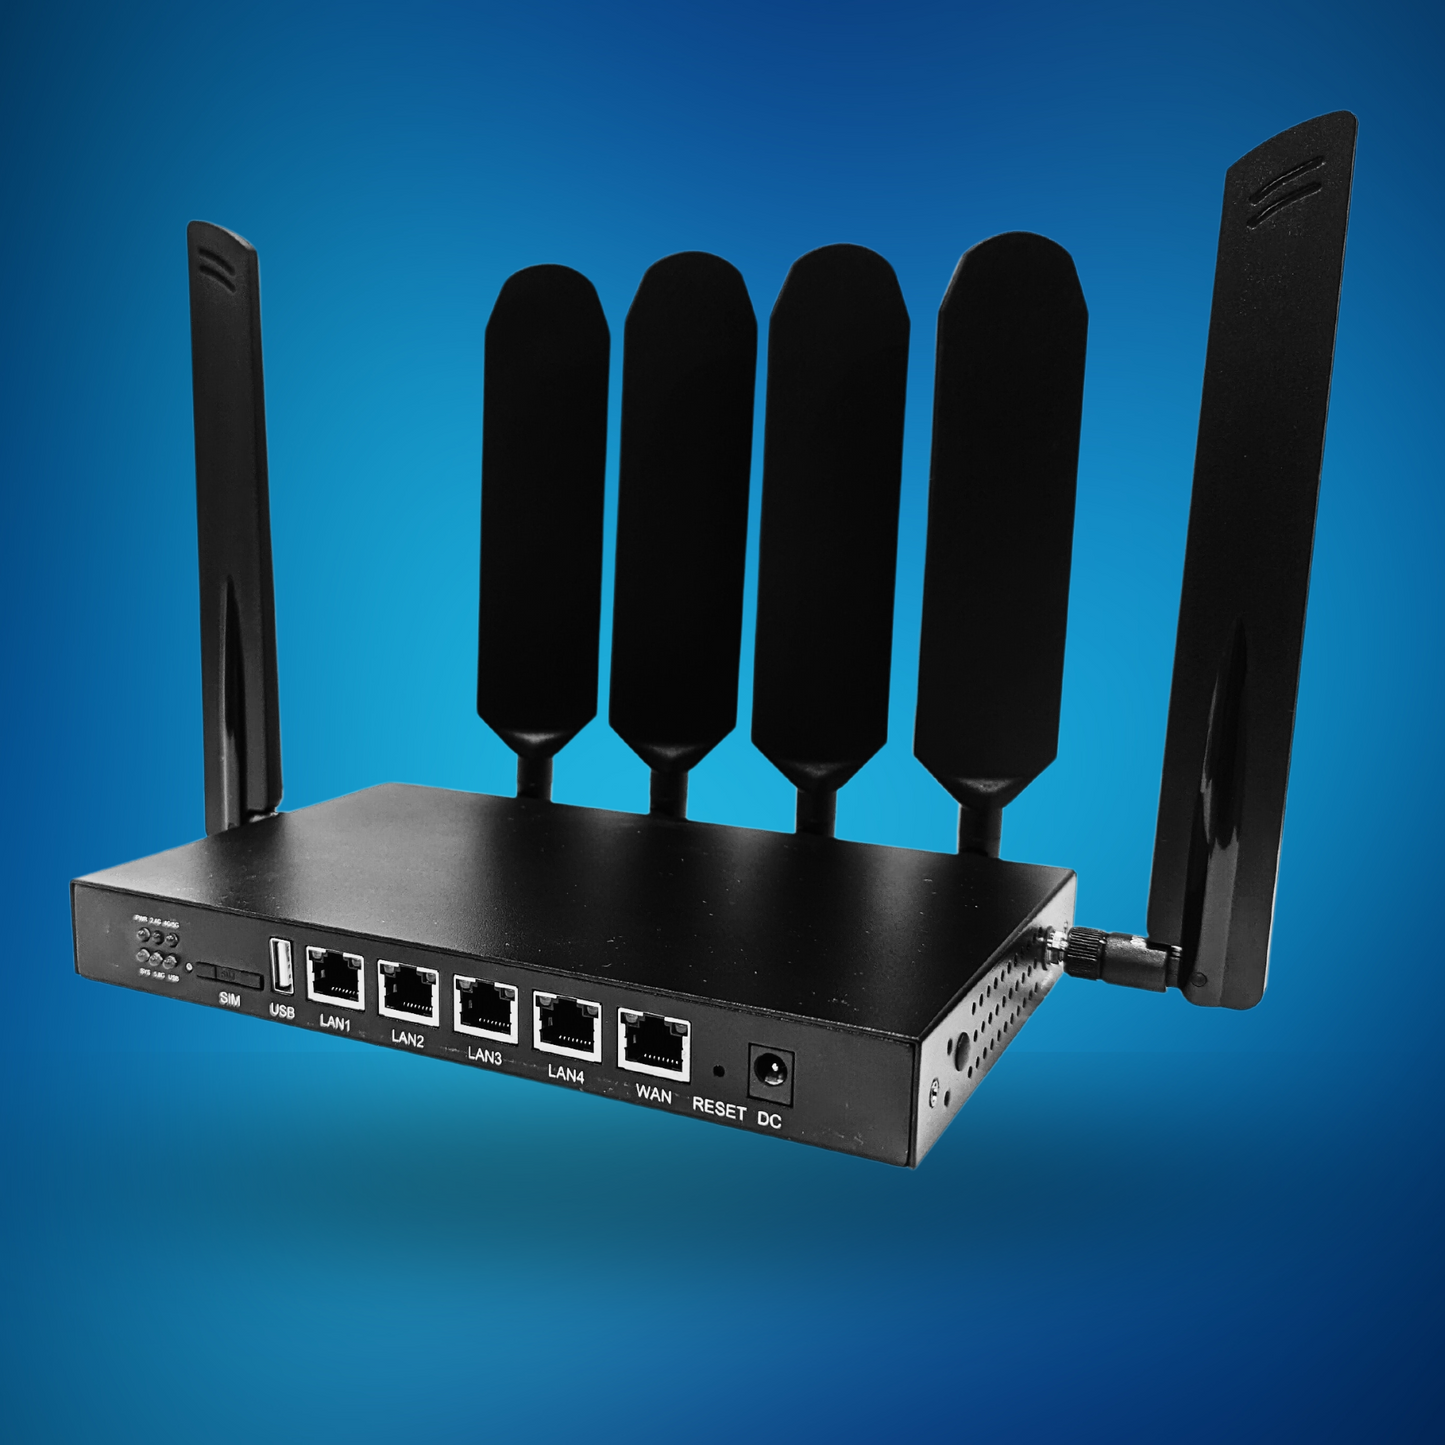 5G Pro Unlocked Dual-Band OpenWrt Wireless Router with Upgraded Paddle Antennas